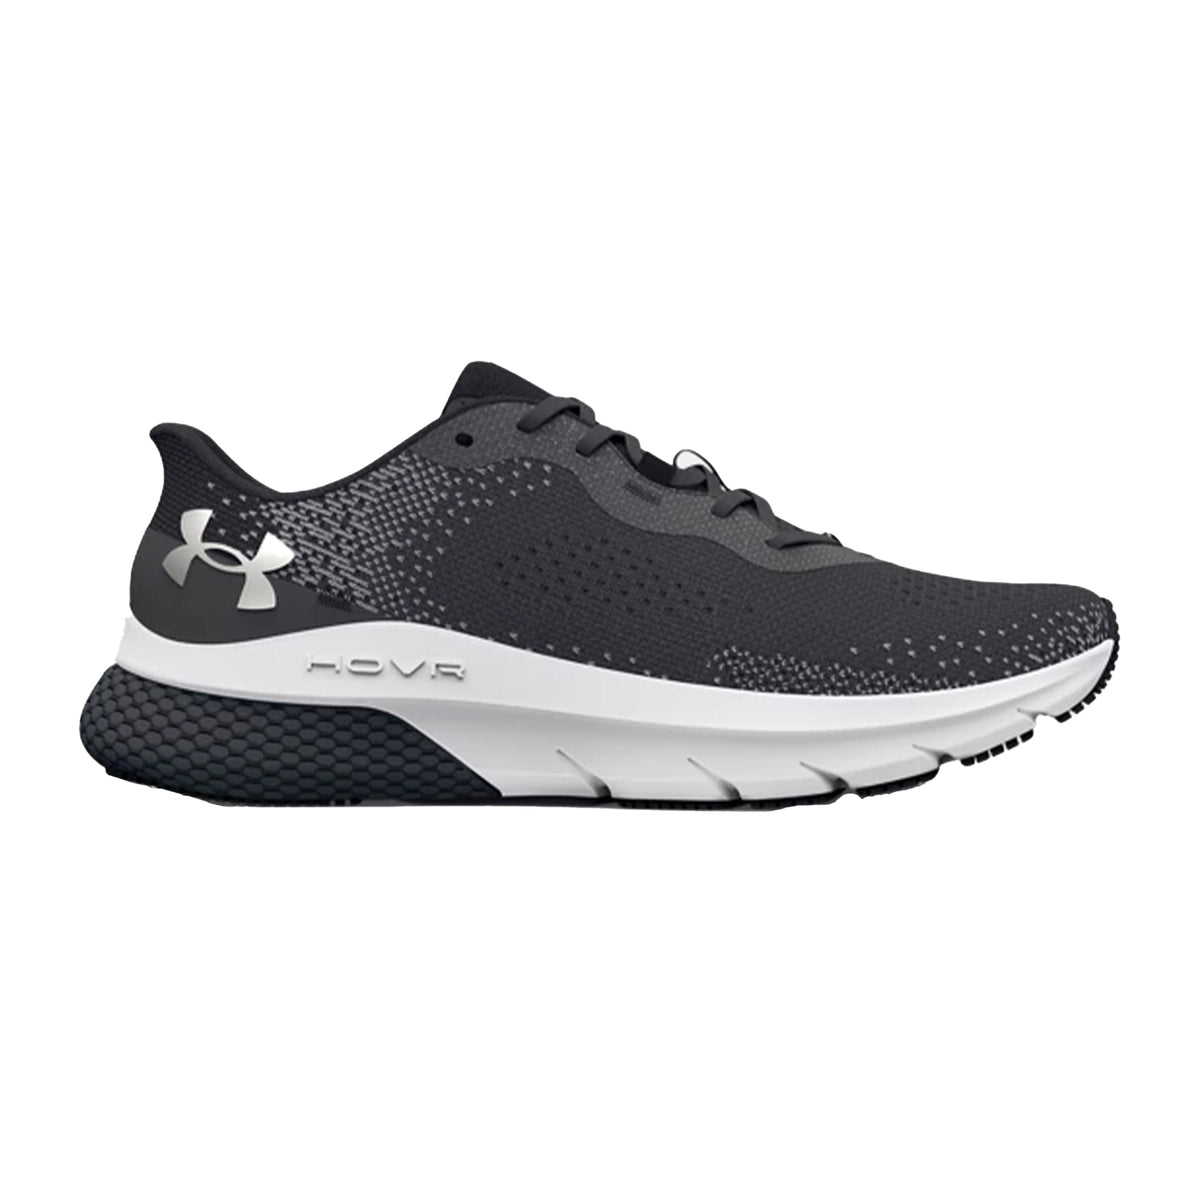 Under Armour HOVR Turbulence 2 Kids Running Shoes: Jet Grey/Metalic Silver